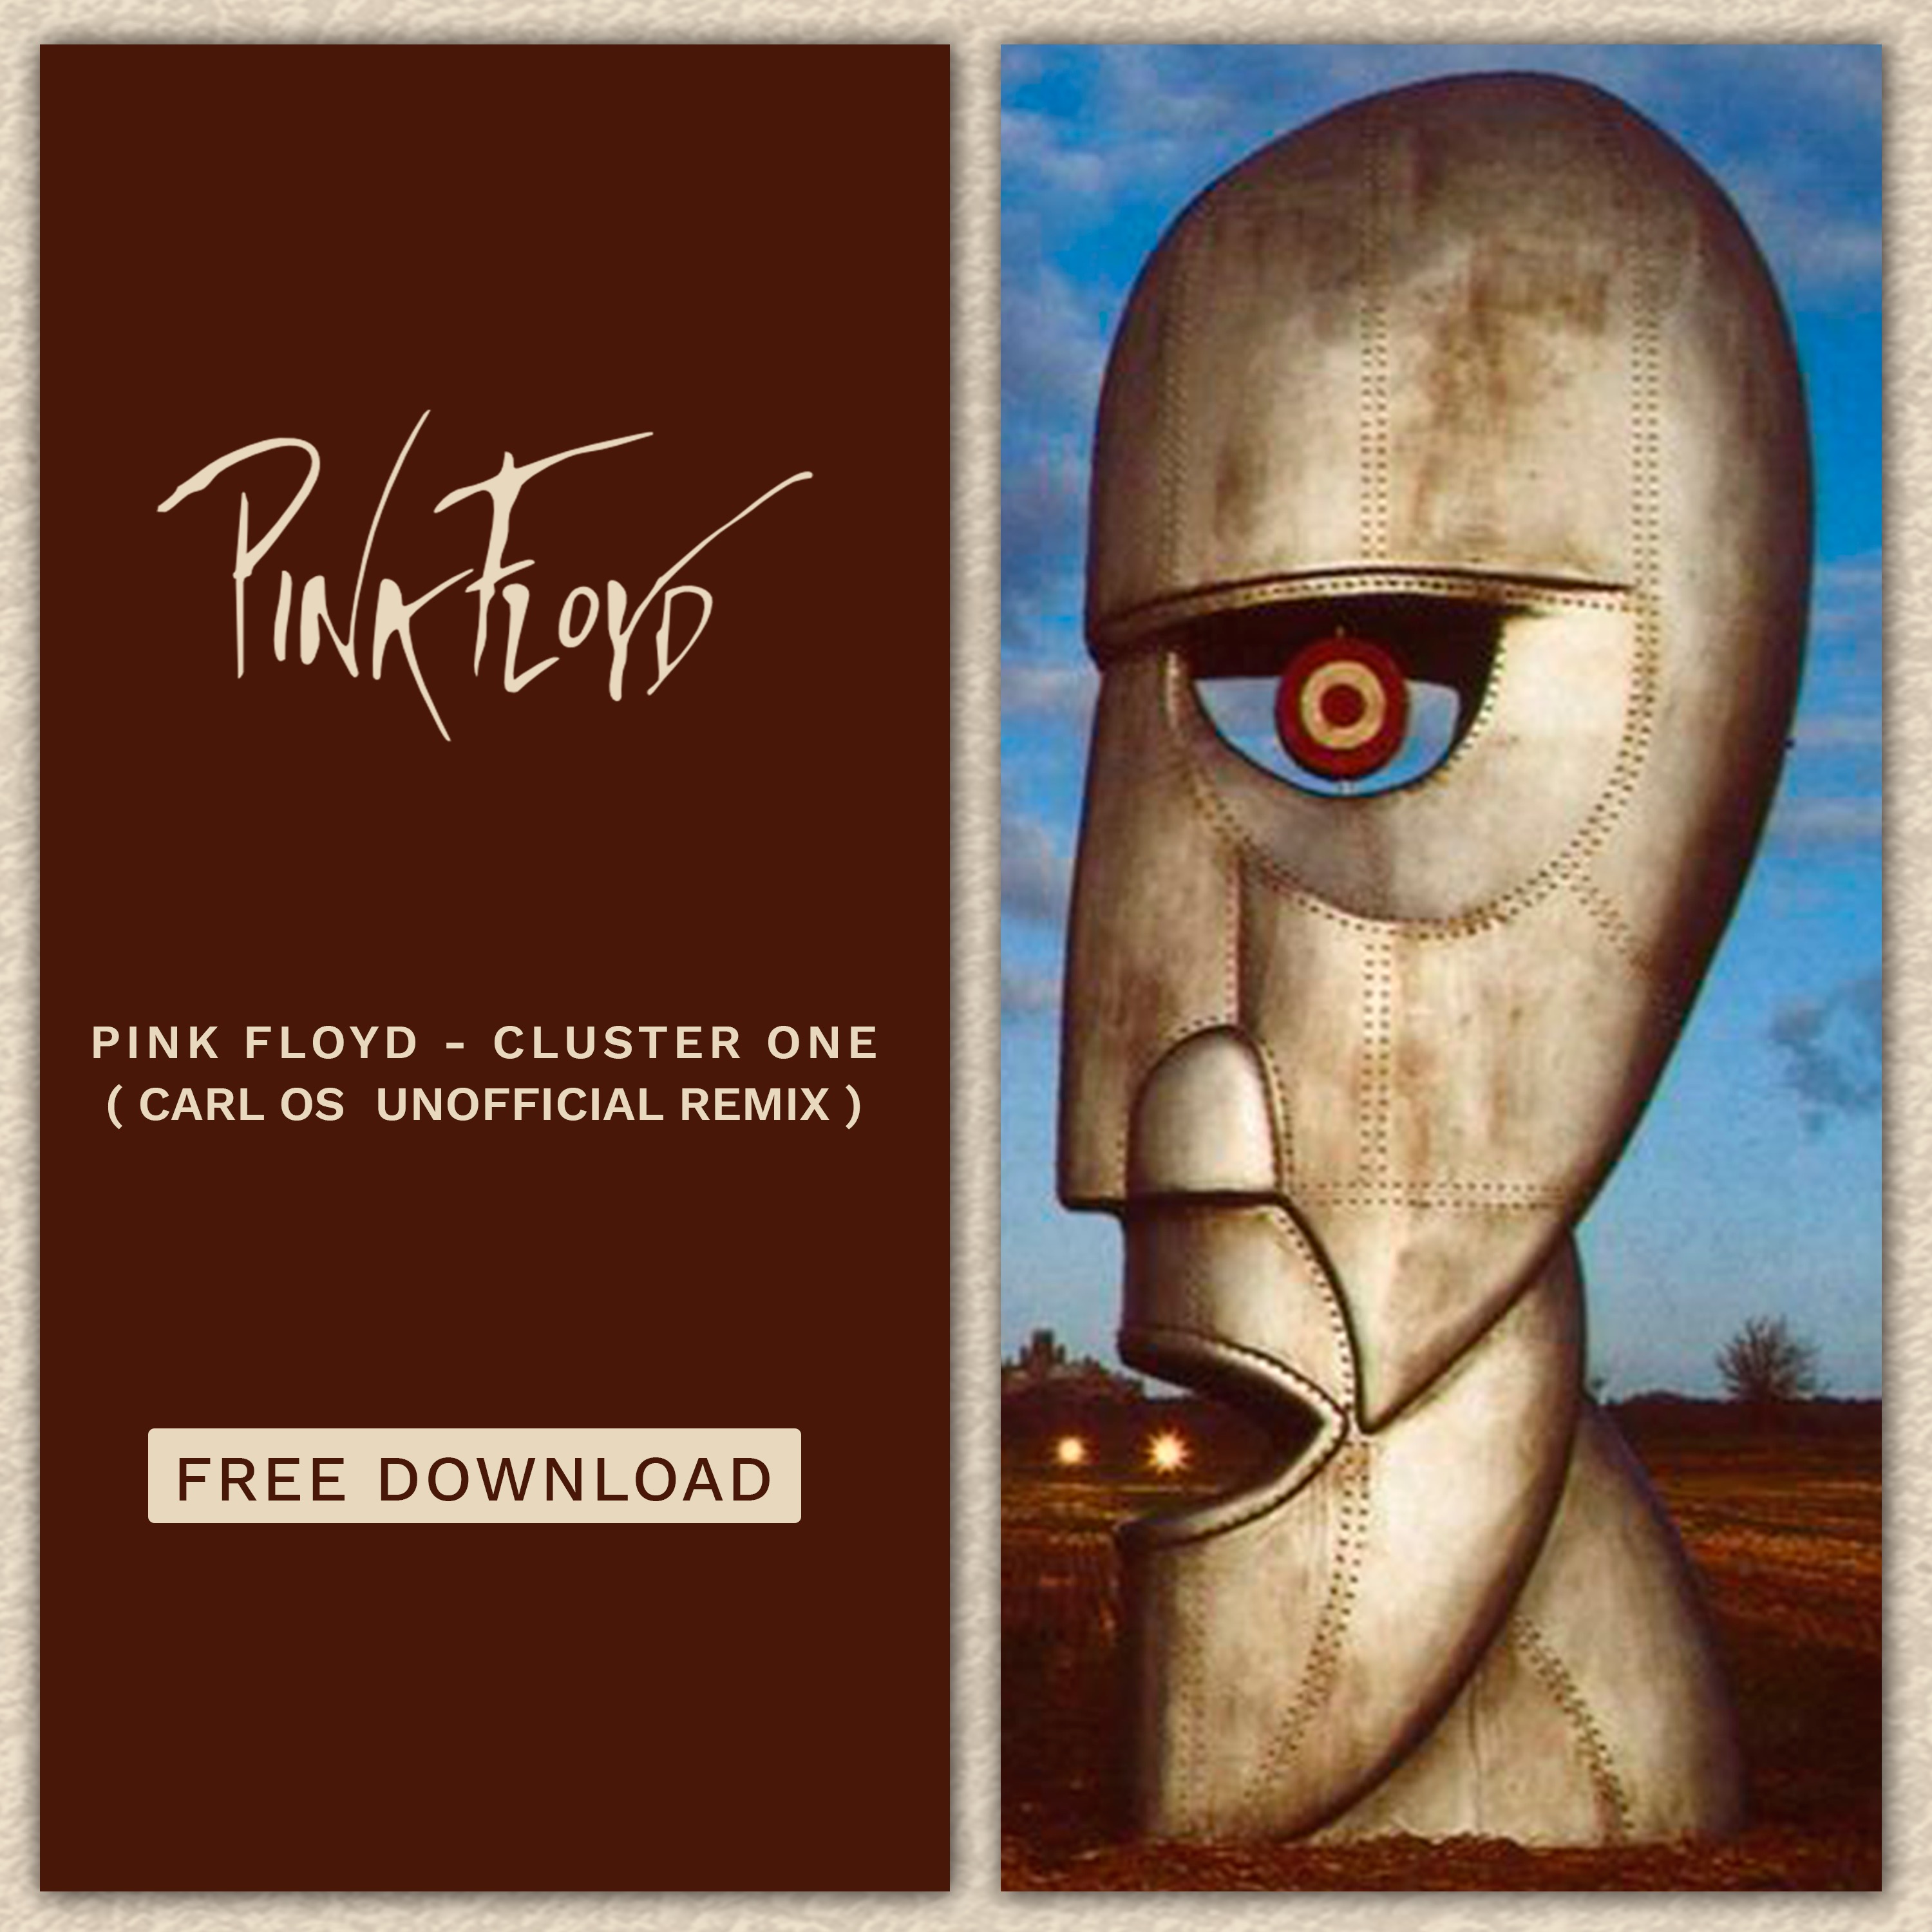 İndirin! FREE DOWNLOAD: Pink Floyd - Cluster One (Carl OS Unofficial Remix)